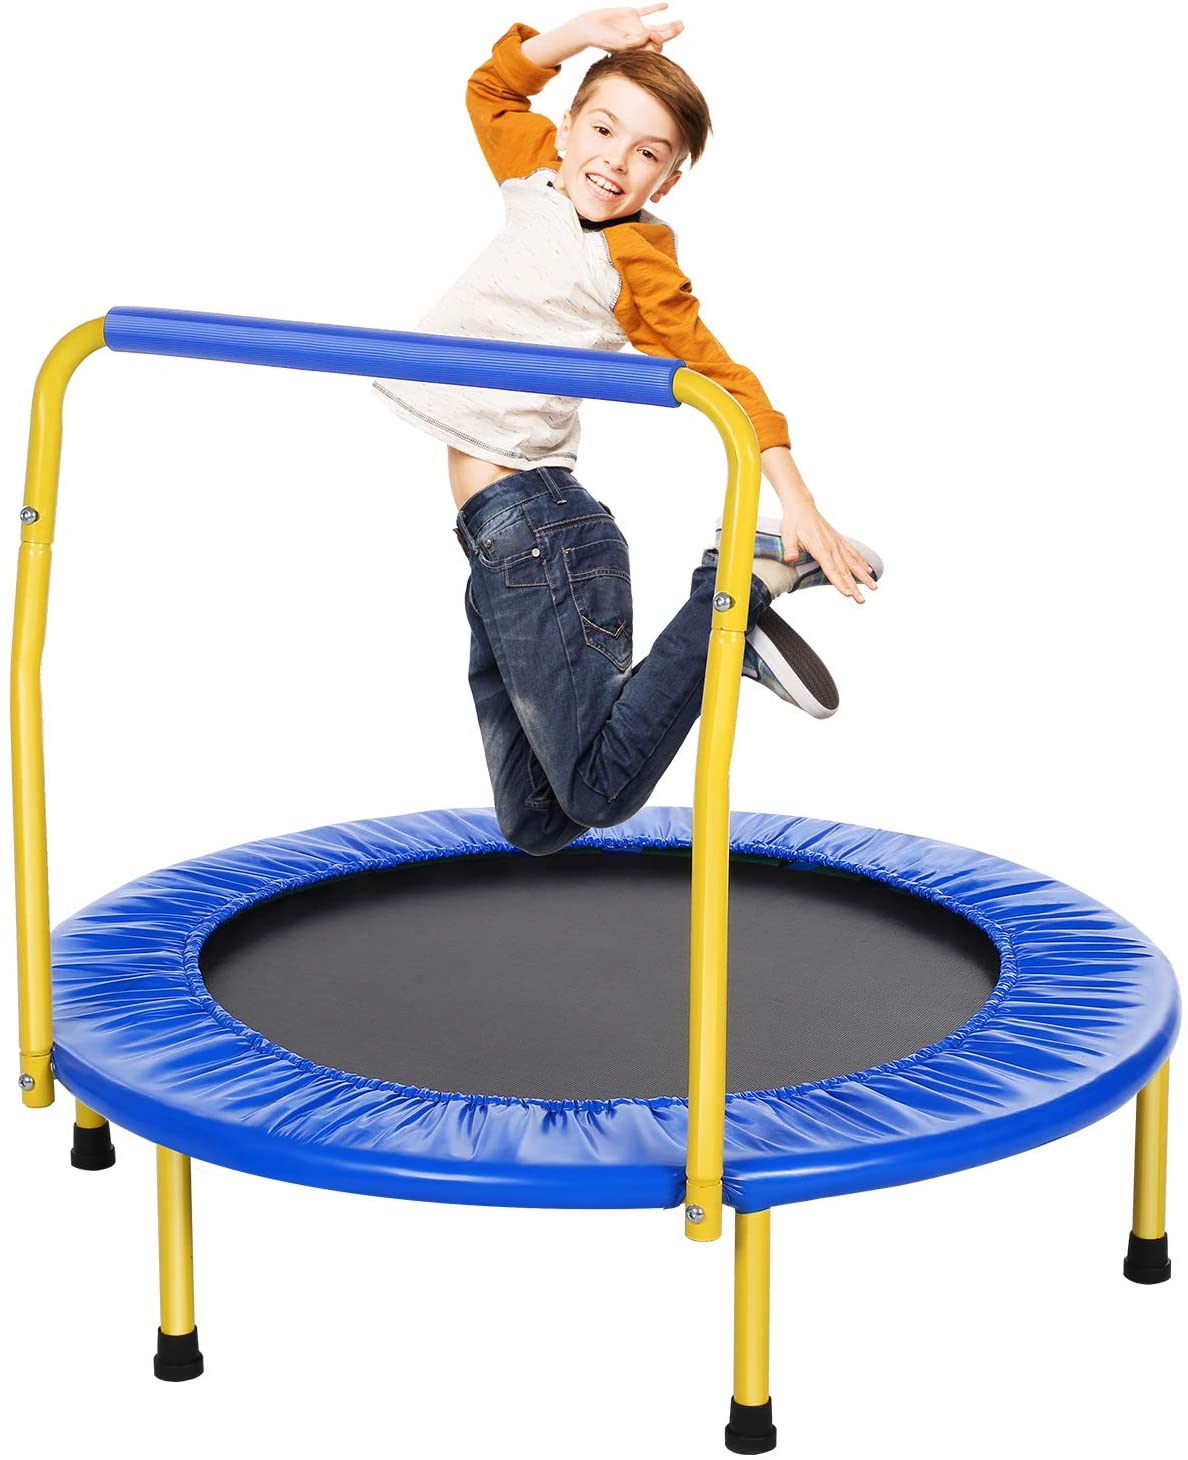 BCAN Mini Trampoline Review